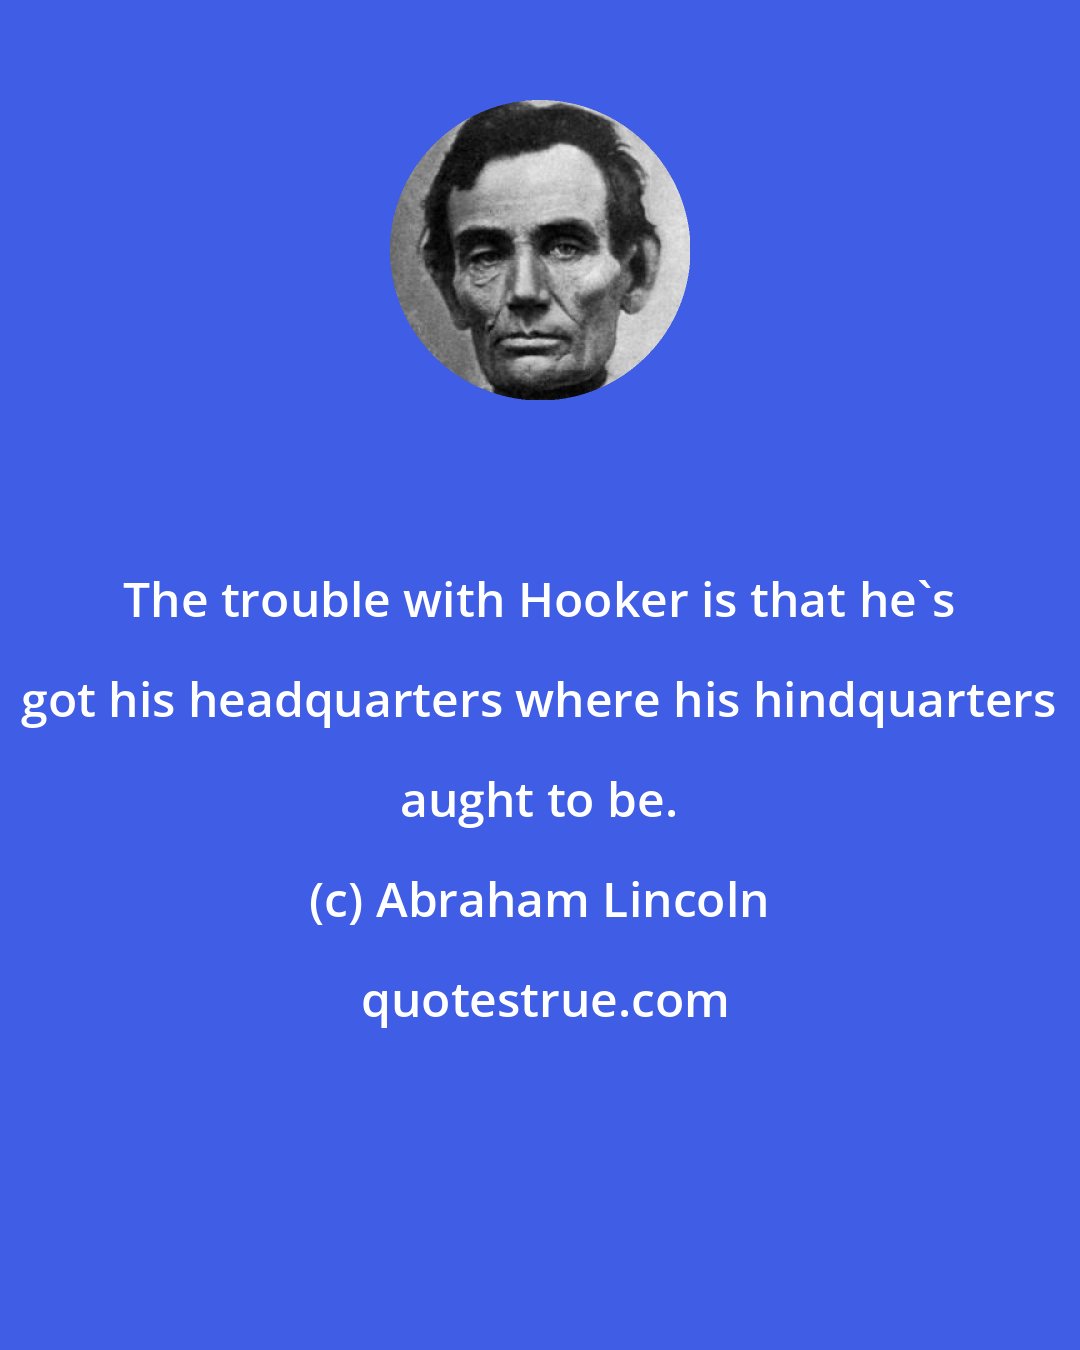 Abraham Lincoln: The trouble with Hooker is that he's got his headquarters where his hindquarters aught to be.